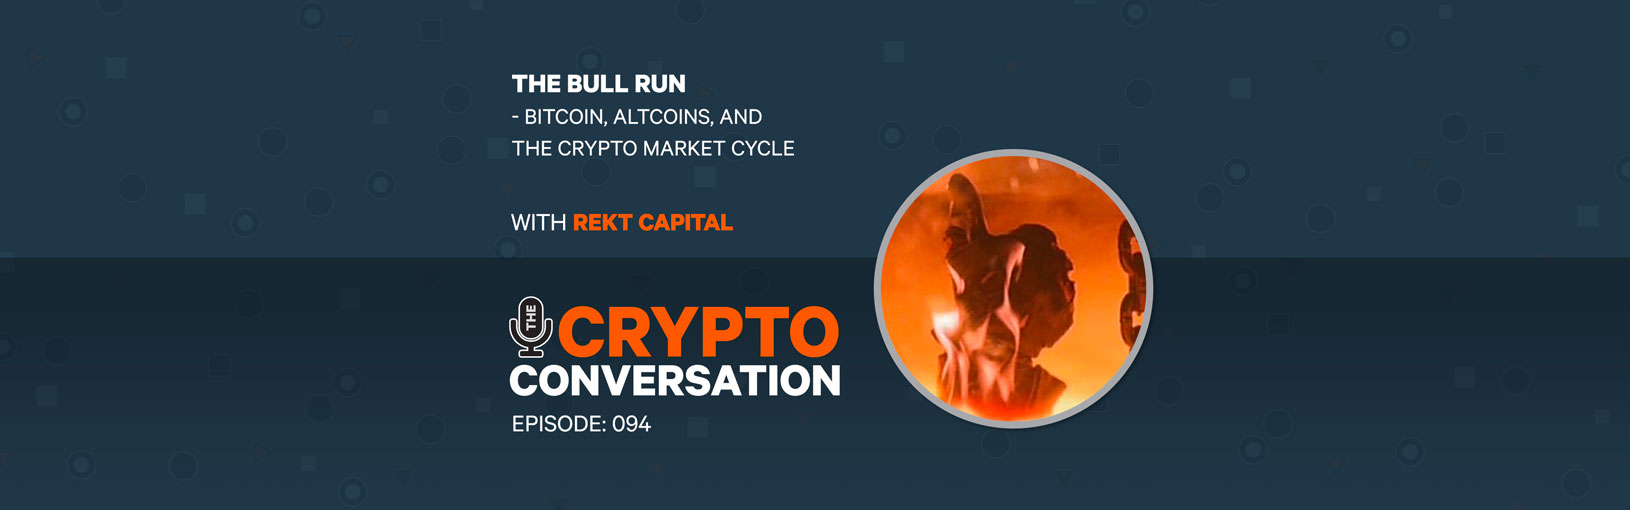 REKT Capital Returns – Bitcoin, Altcoins, and Number Go Up